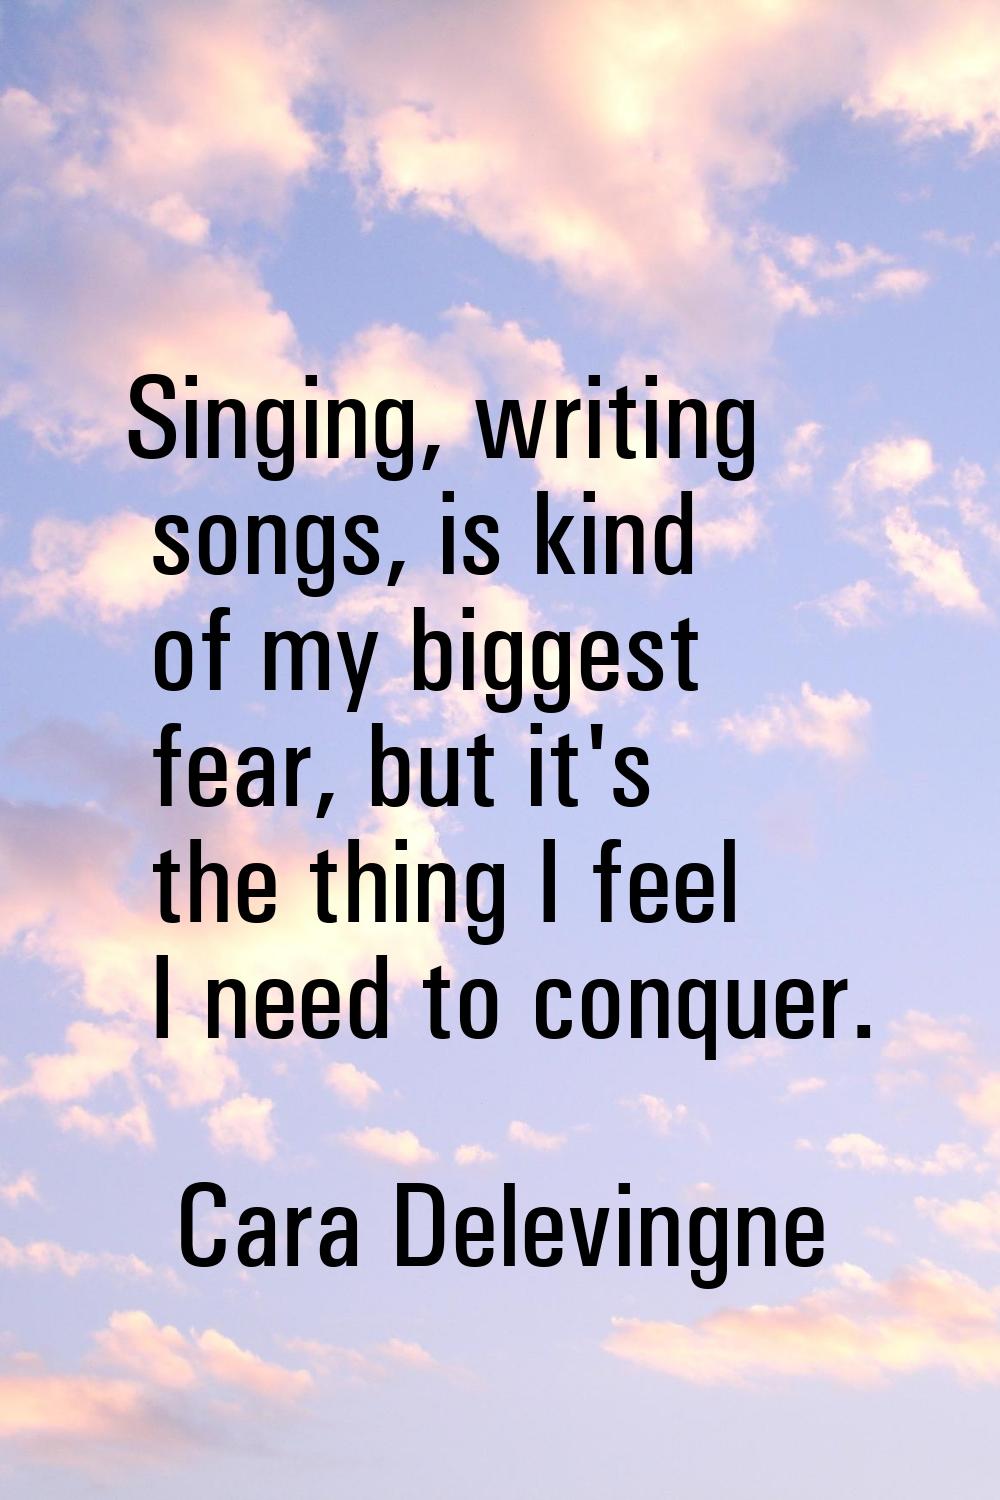 Singing, writing songs, is kind of my biggest fear, but it's the thing I feel I need to conquer.